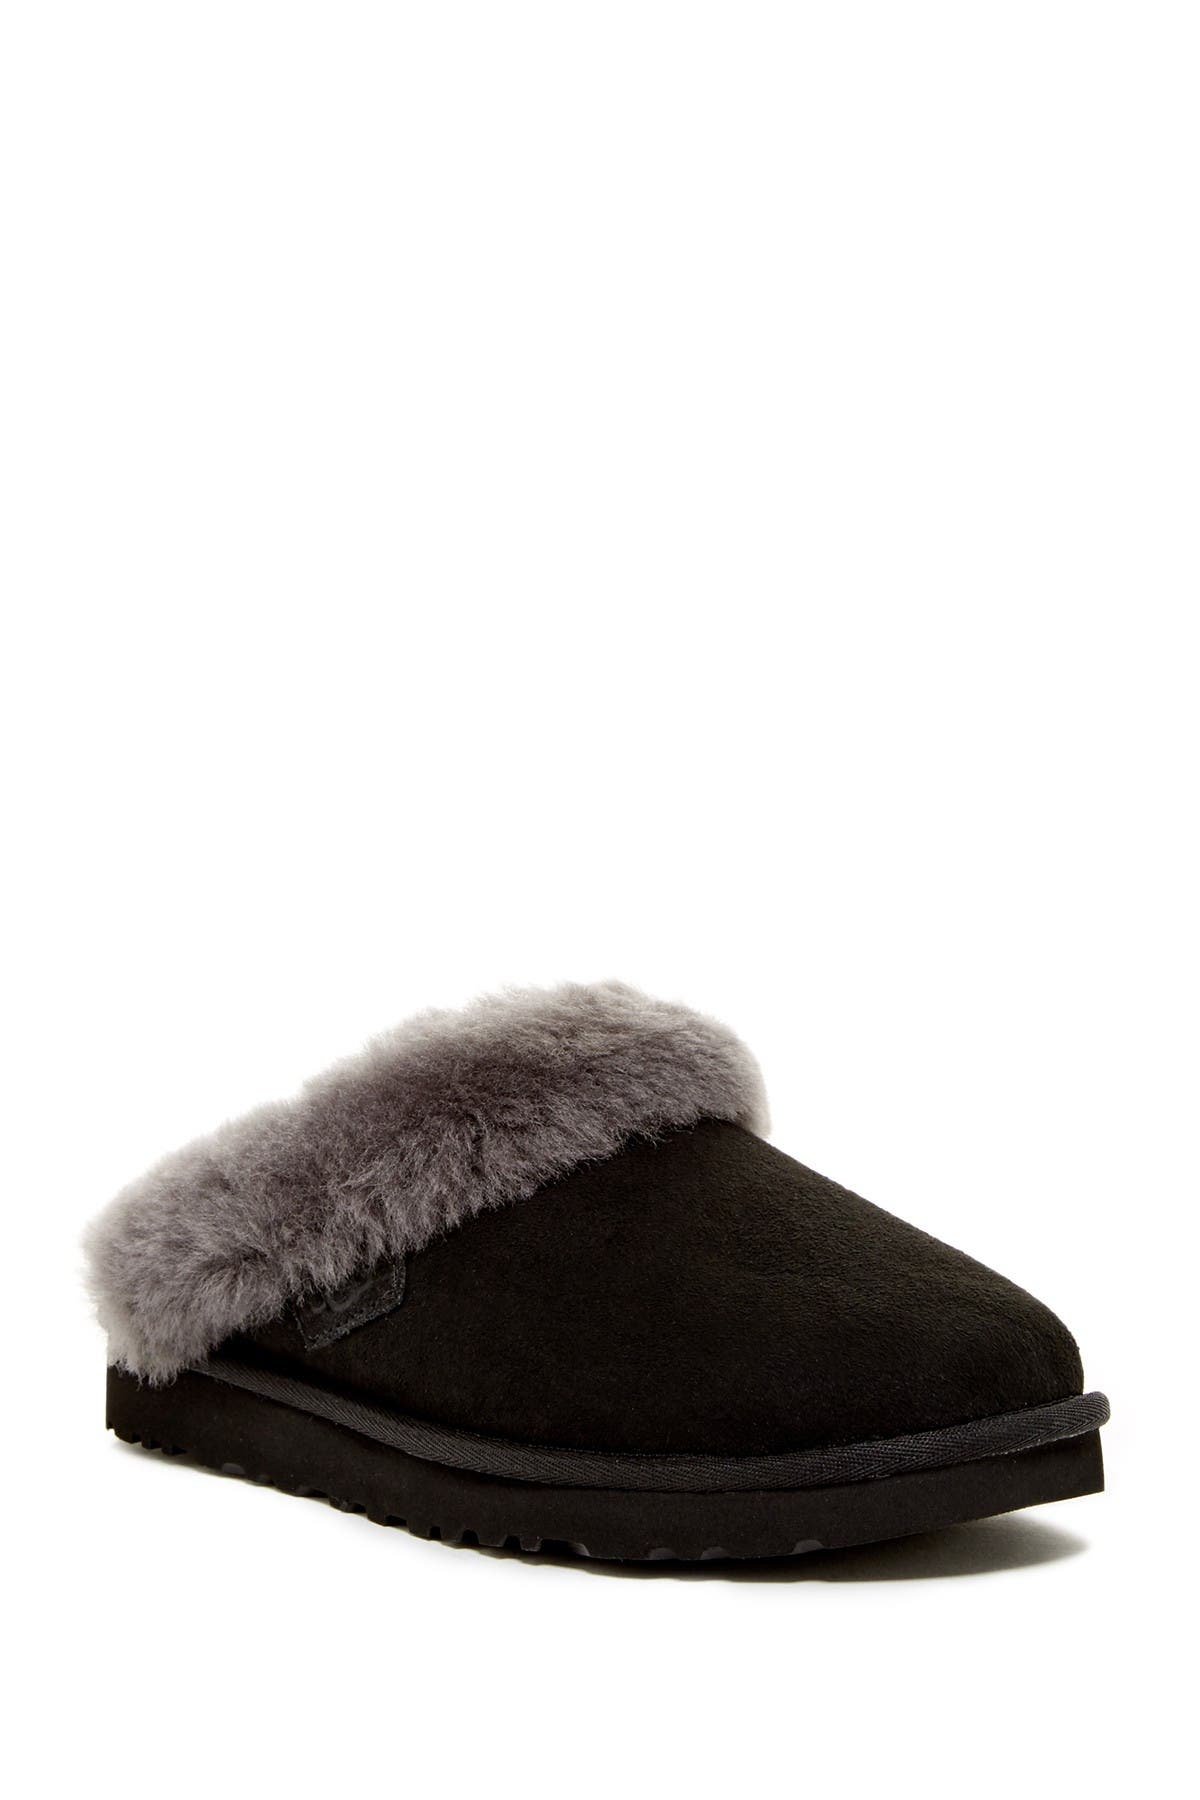 ugg cluggette slippers